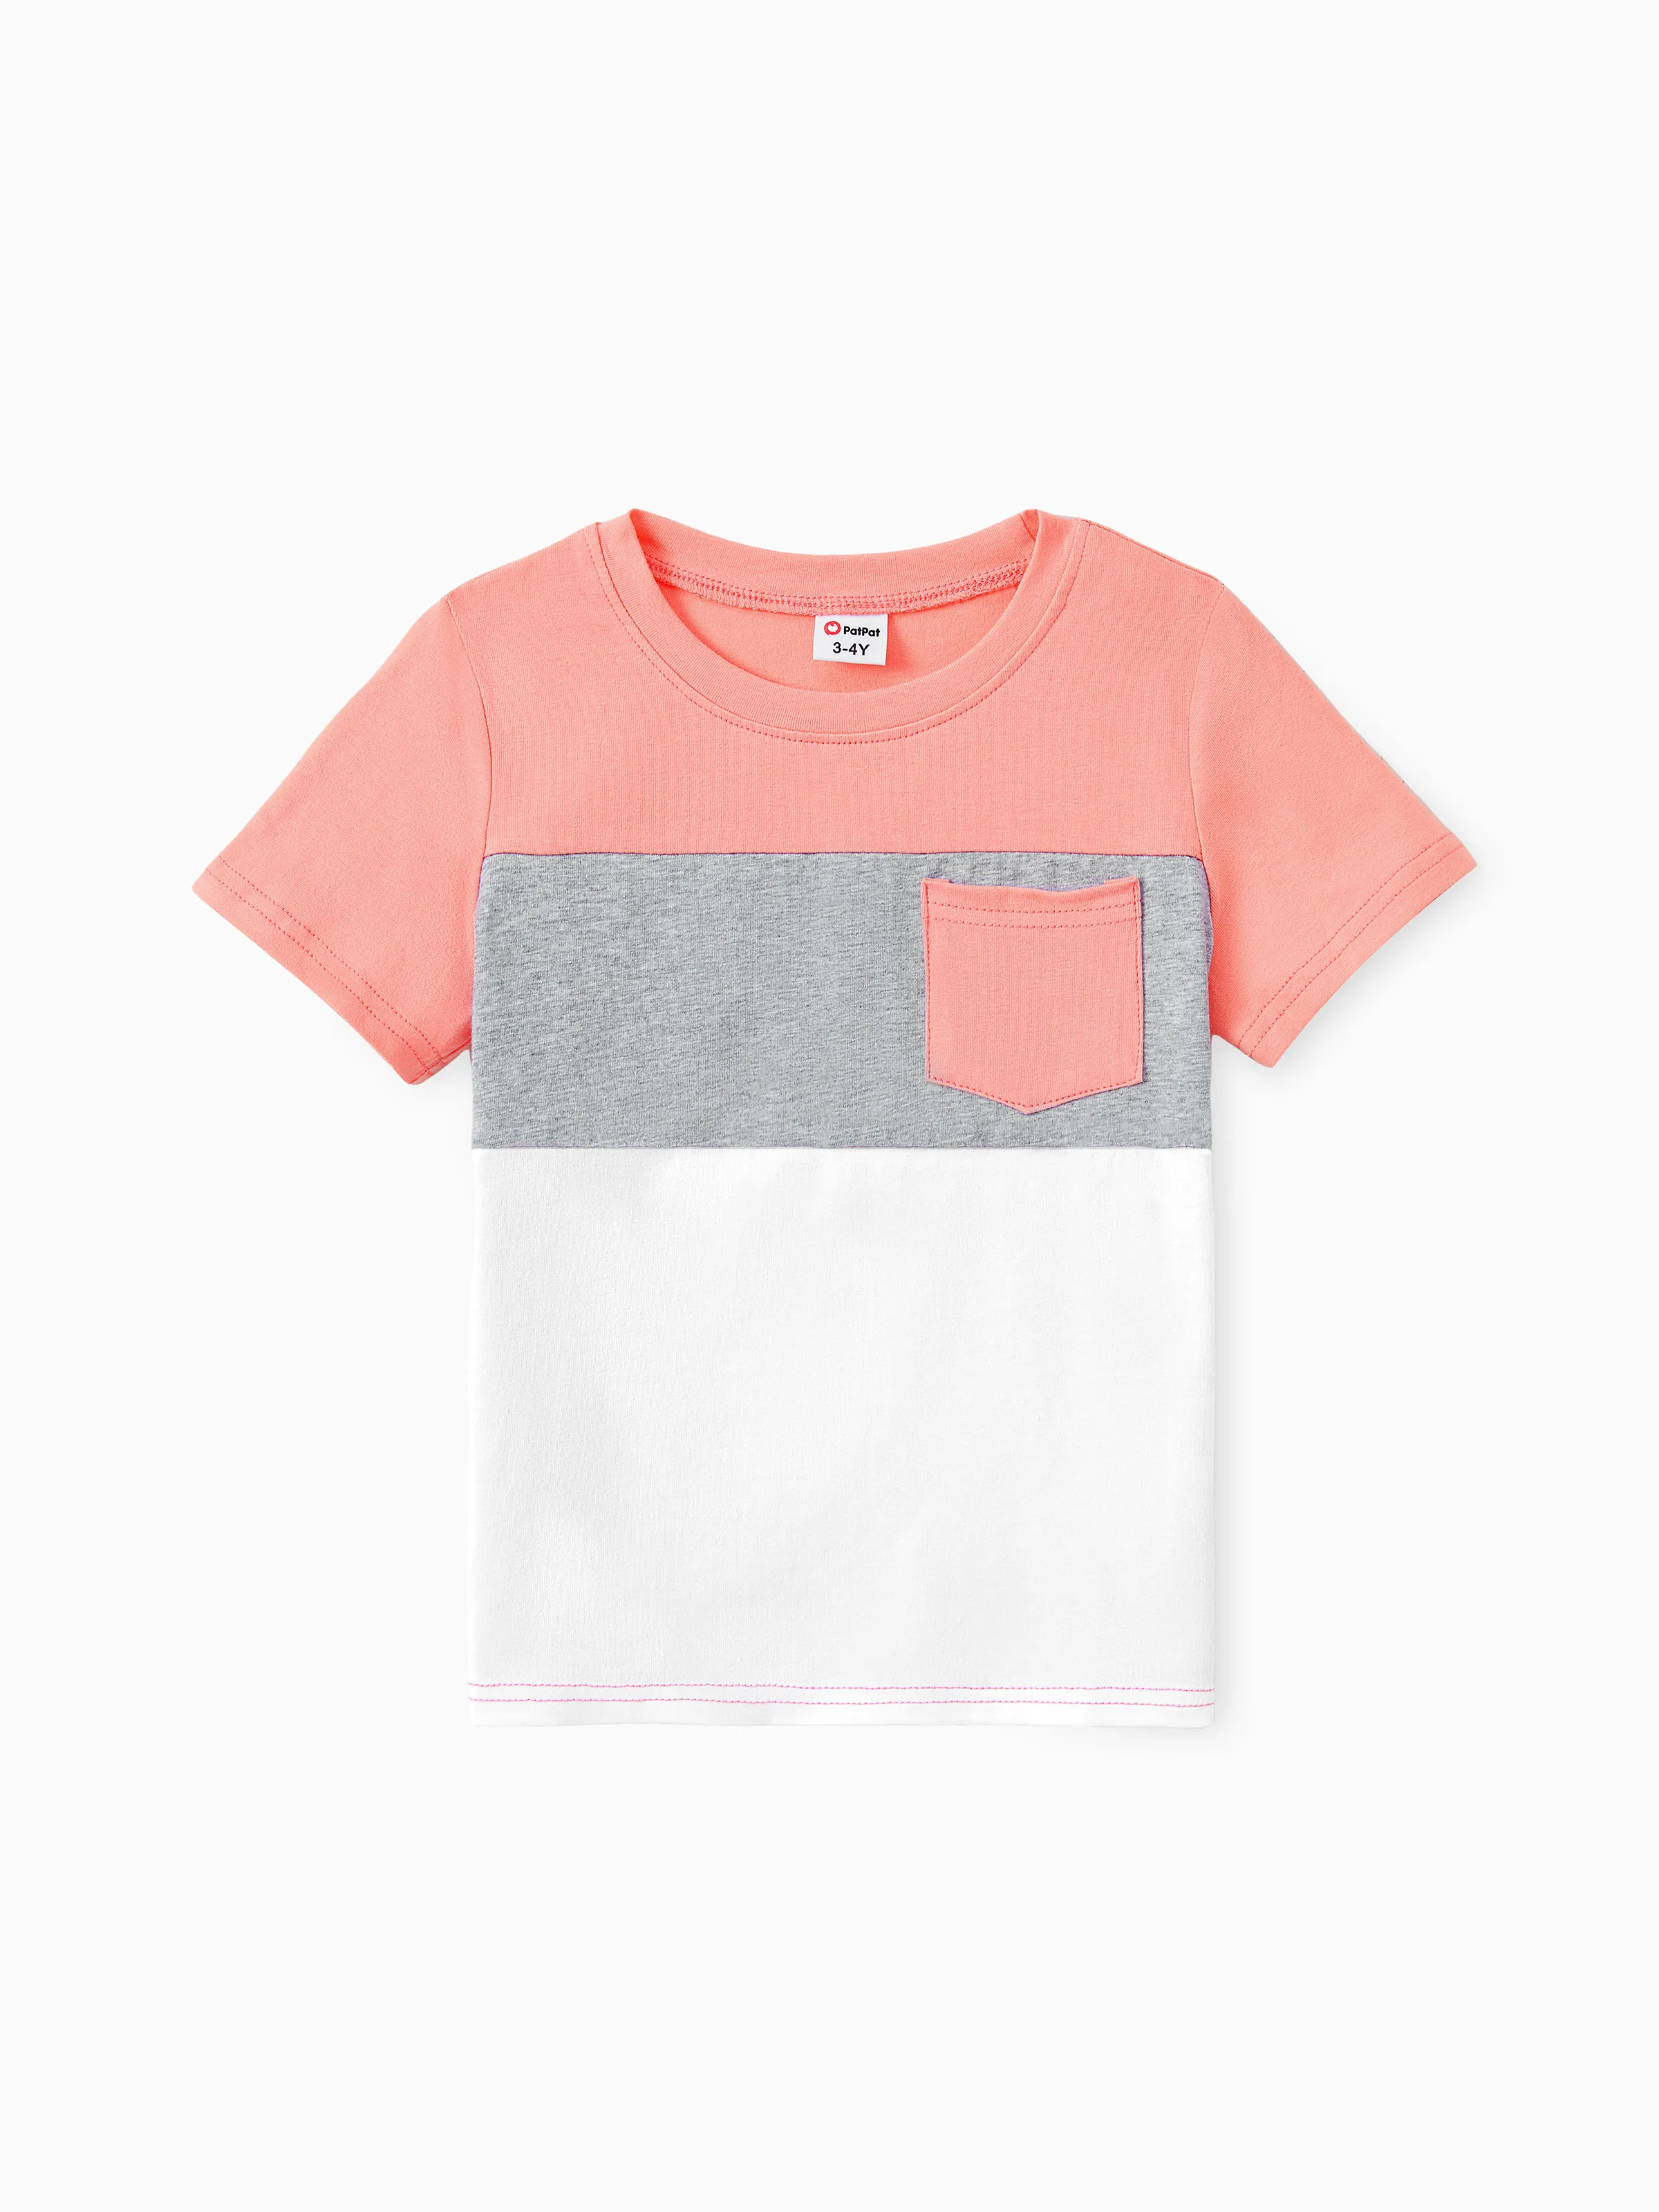 

Family Matching Sets Pinkish Orange Cap-sleeve Spliced Floral Dresses and Short-sleeve Color Block T-shirts